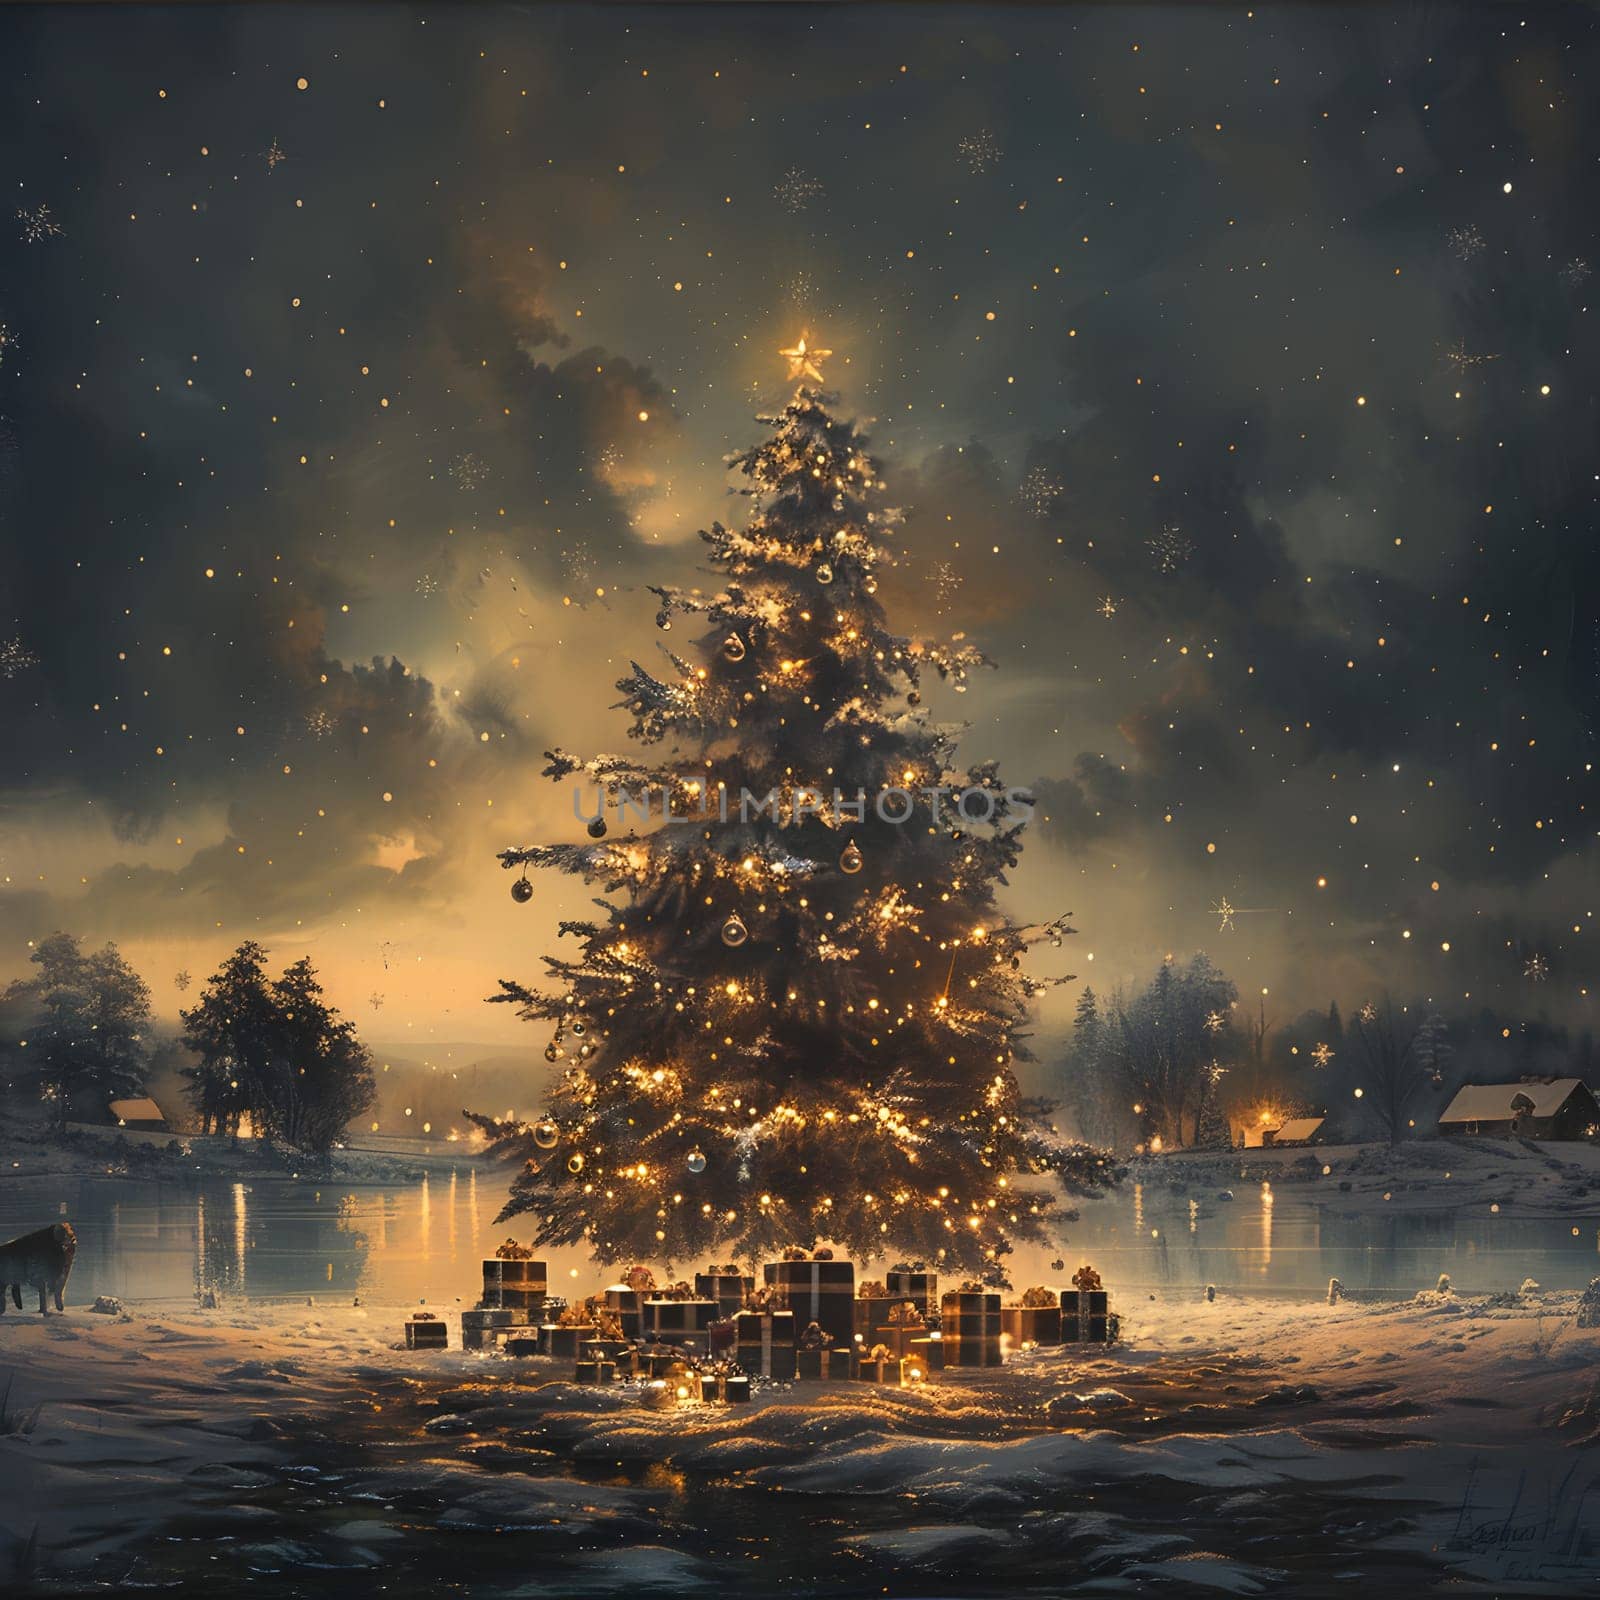 Christmas tree with gifts beneath, set against cloudy sky by Nadtochiy